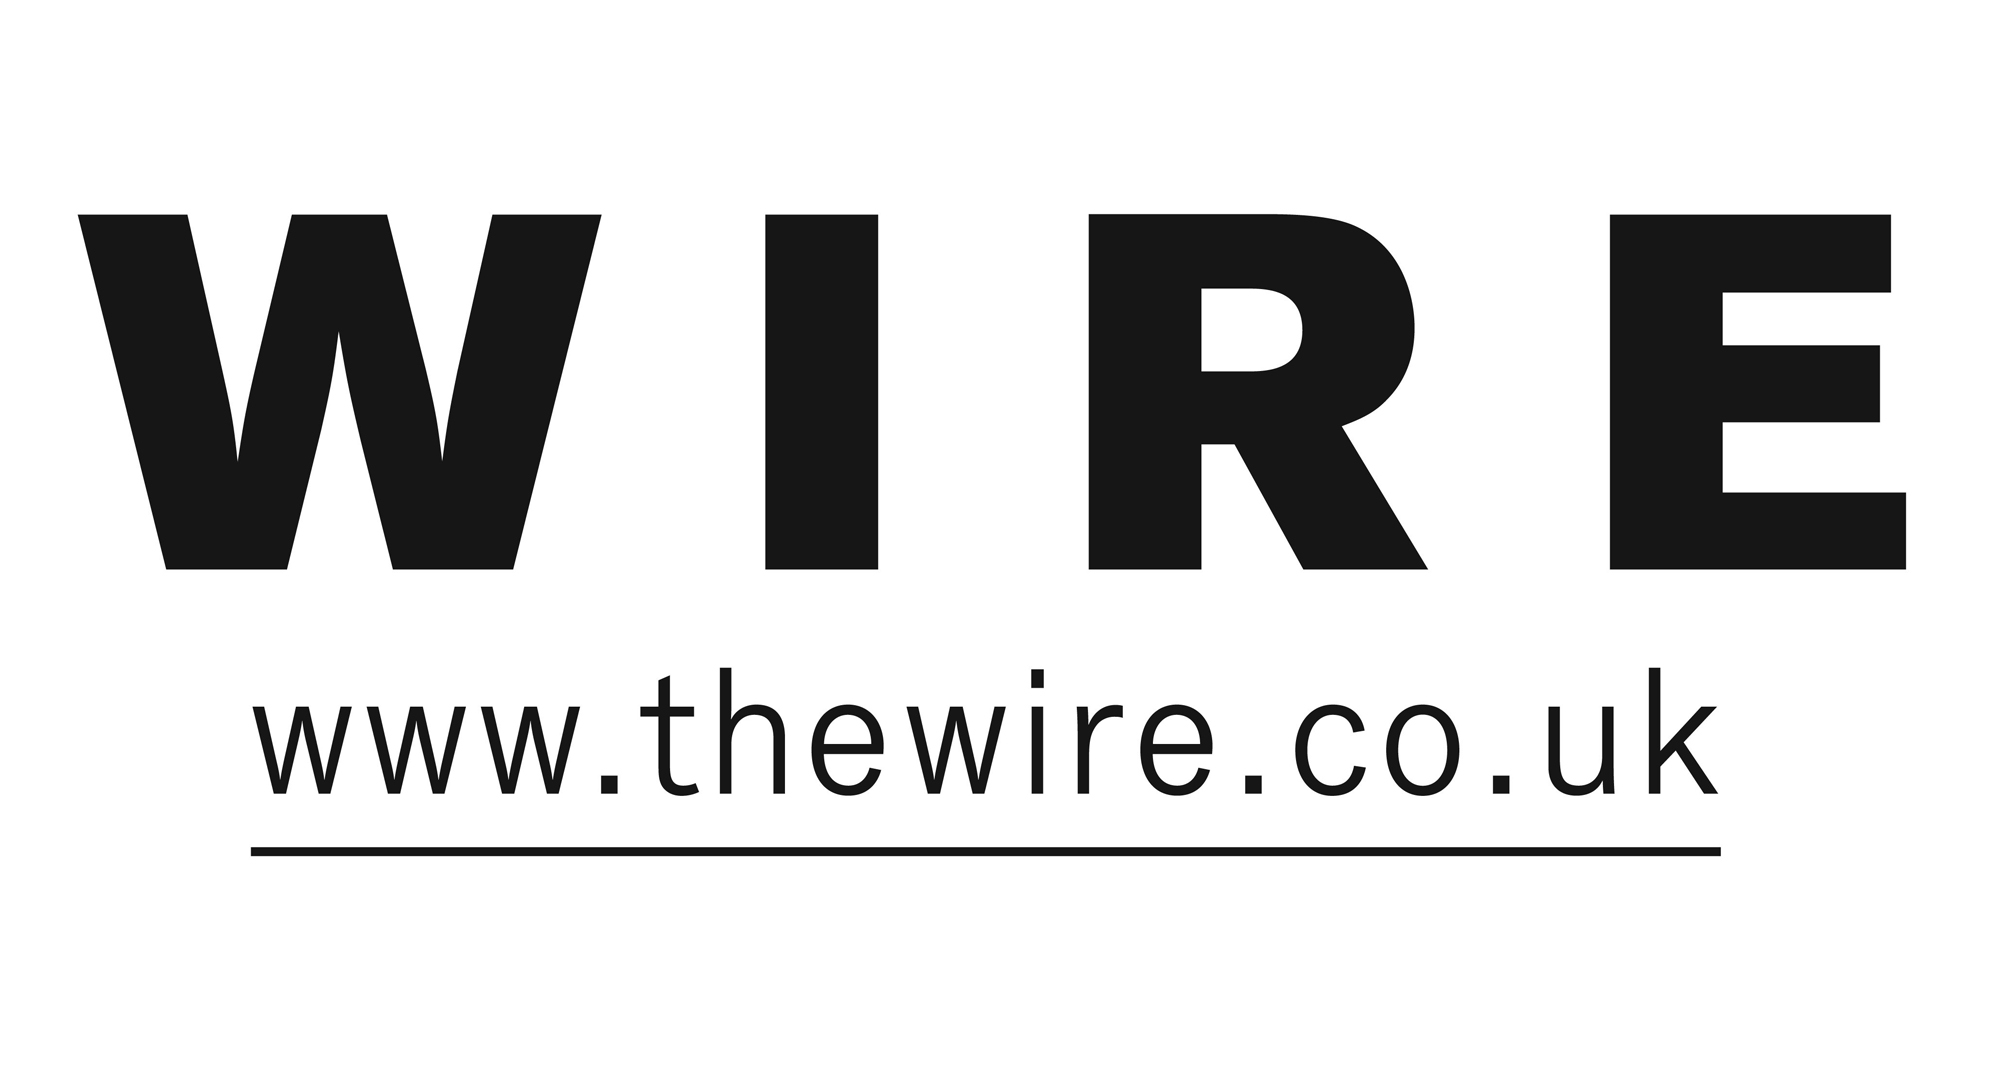 The wire logo